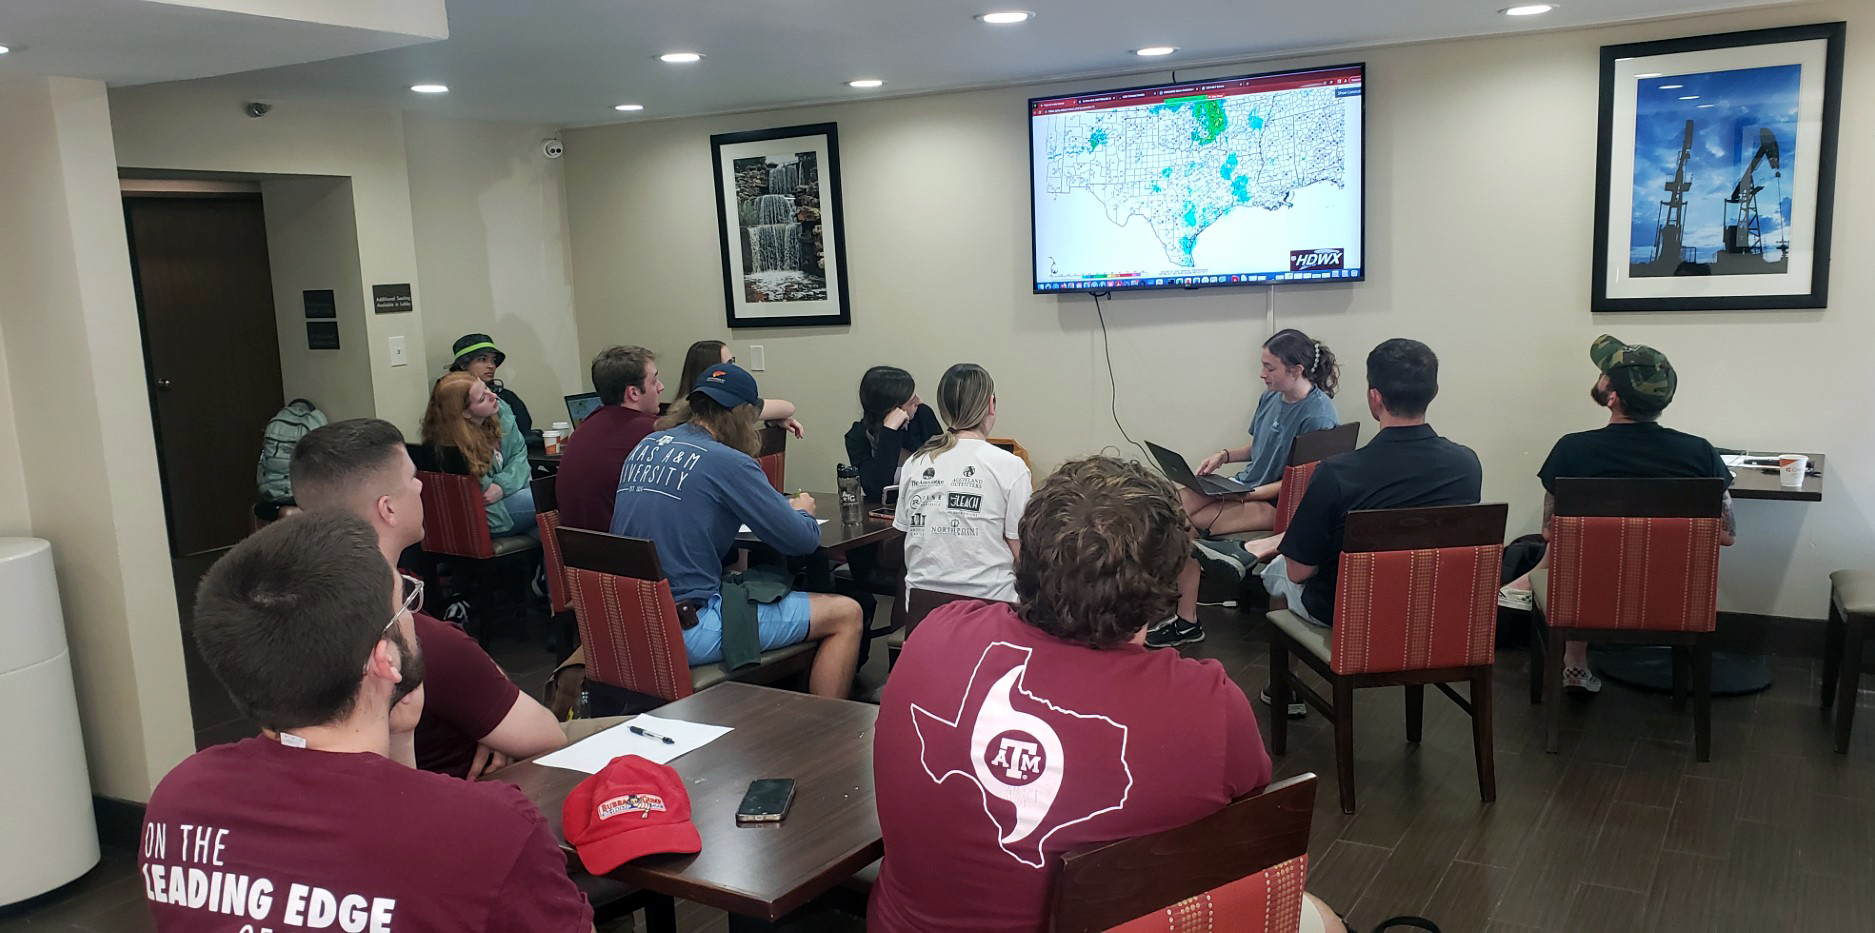 Texas A&amp;M meteorology major Bailey Kropp sits with a laptop at the front of a group of seated students while leading a morning weather forecasting briefing in a hotel breakfast room in Wichita Falls, Texas